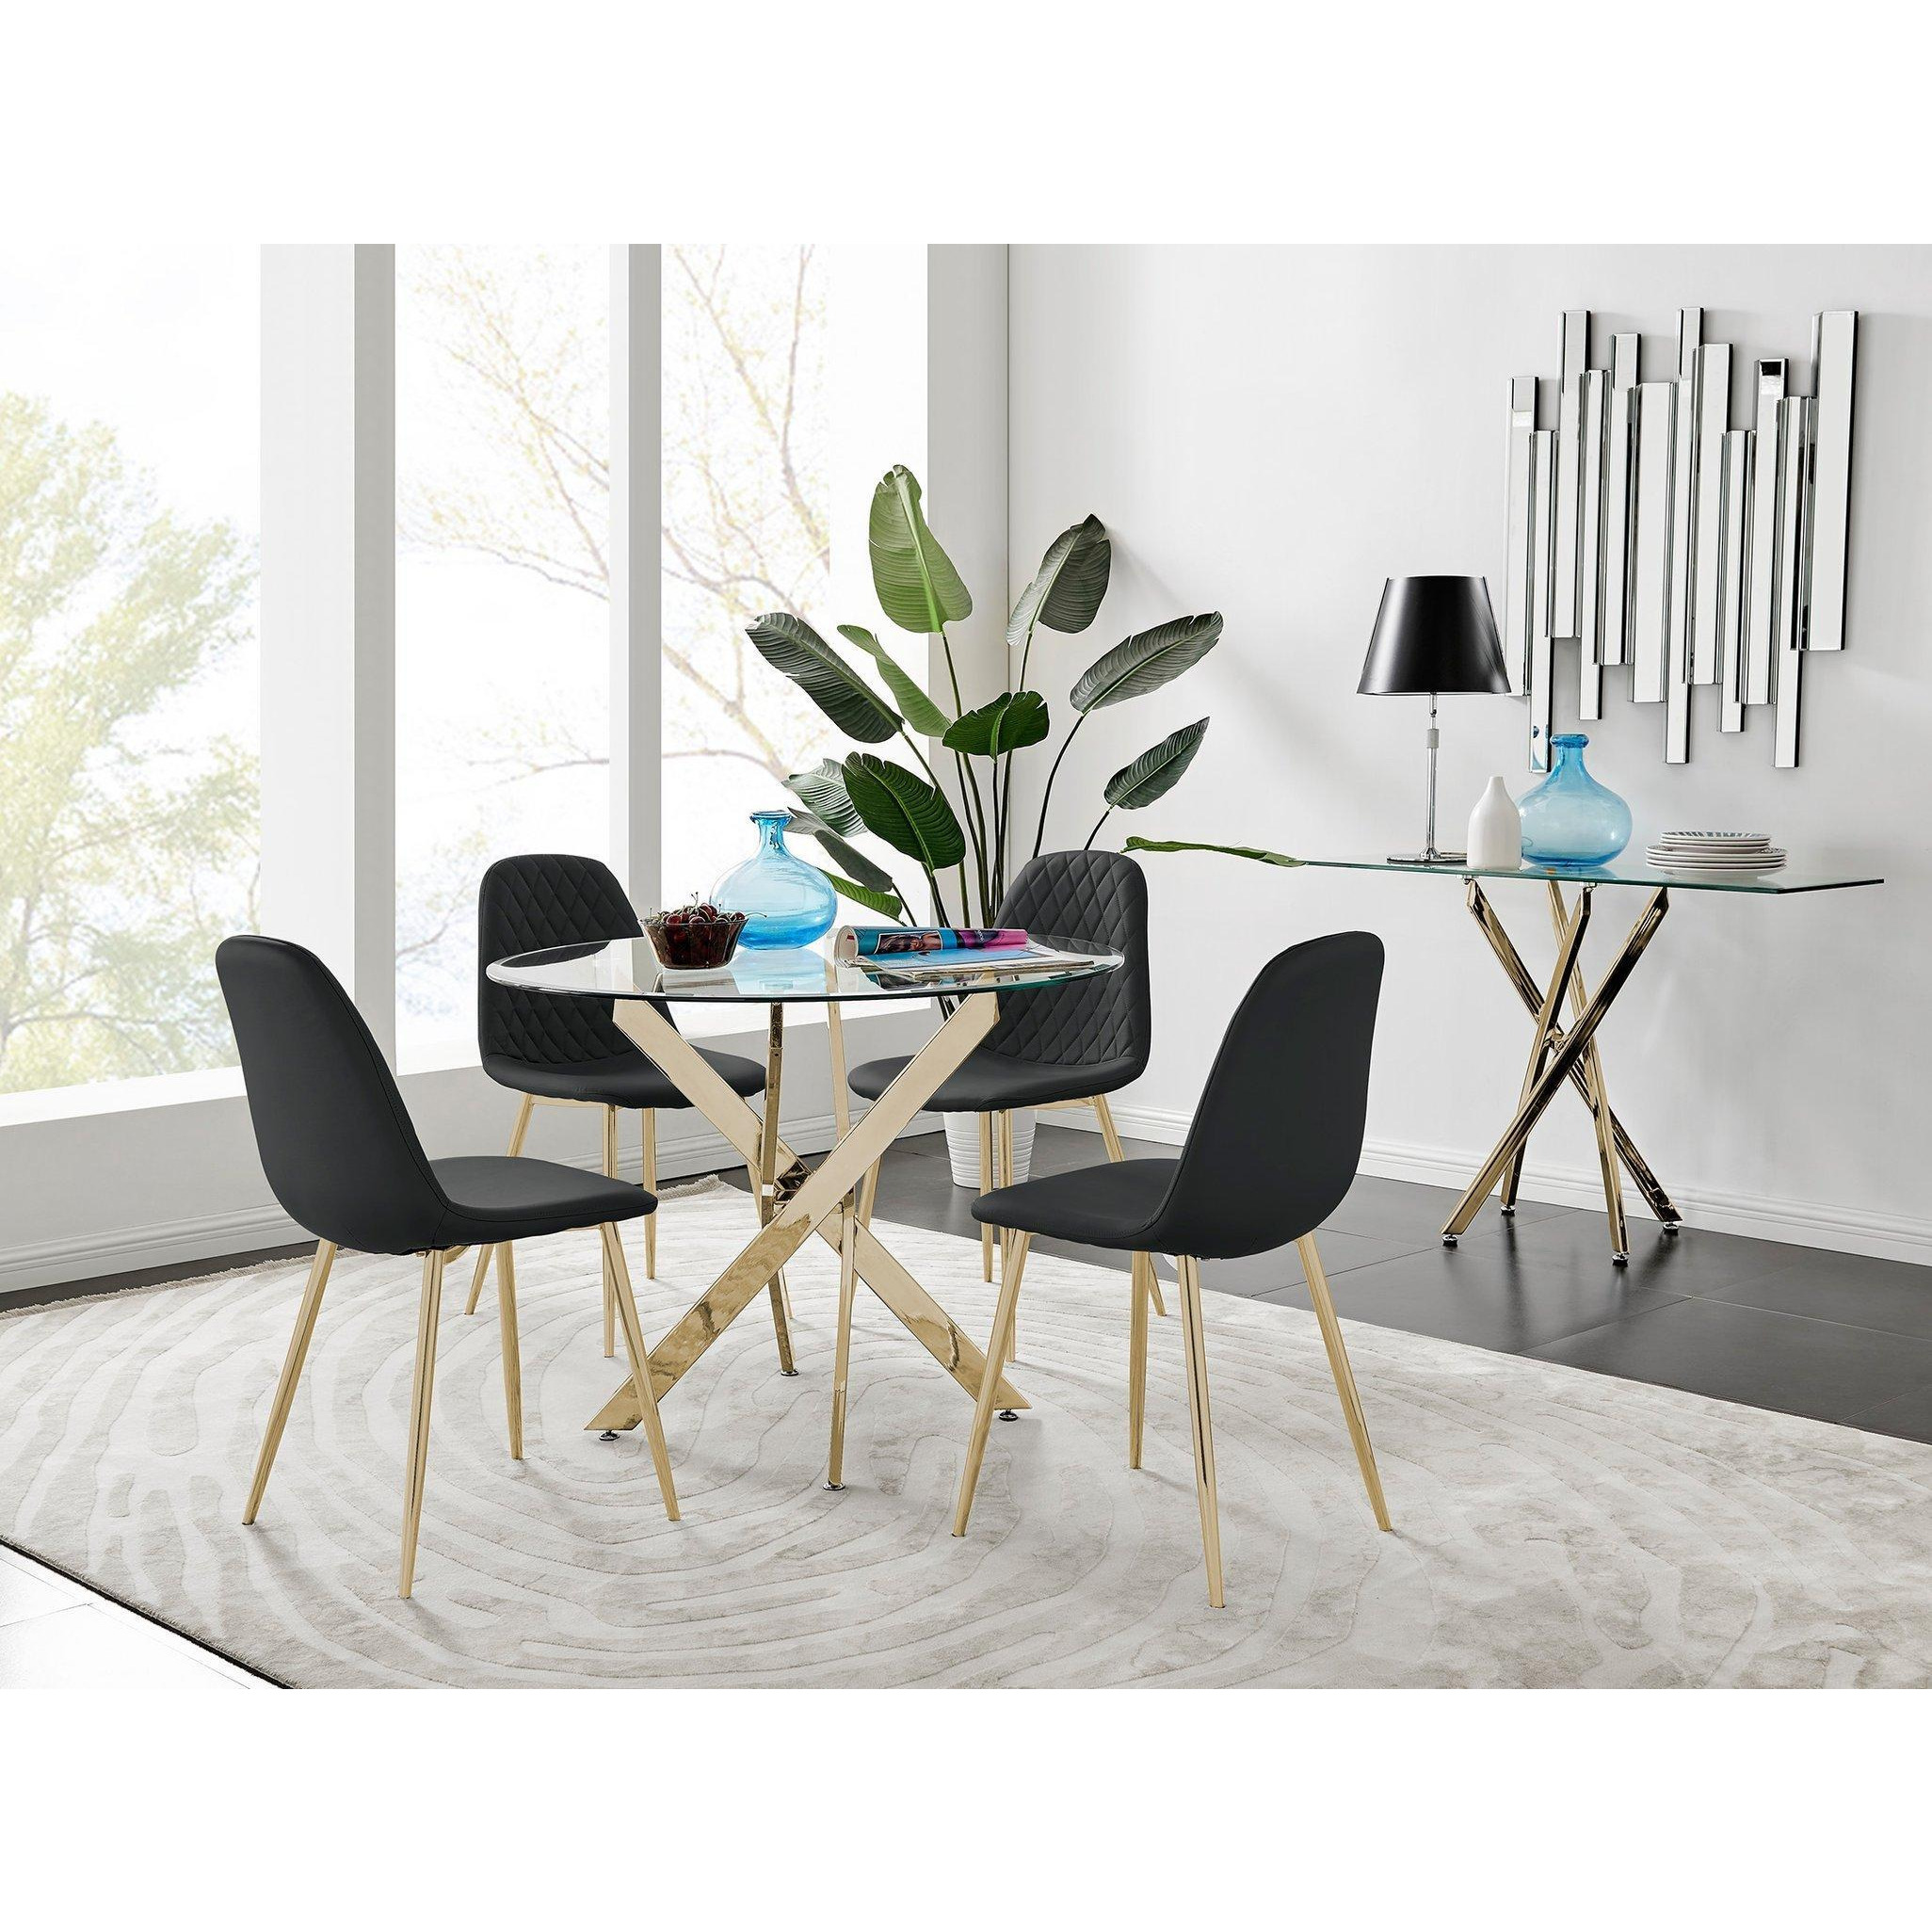 Novara 100cm Round Tempered Glass Dining Table with Gold Legs & 4 Corona Faux Leather Chairs - image 1